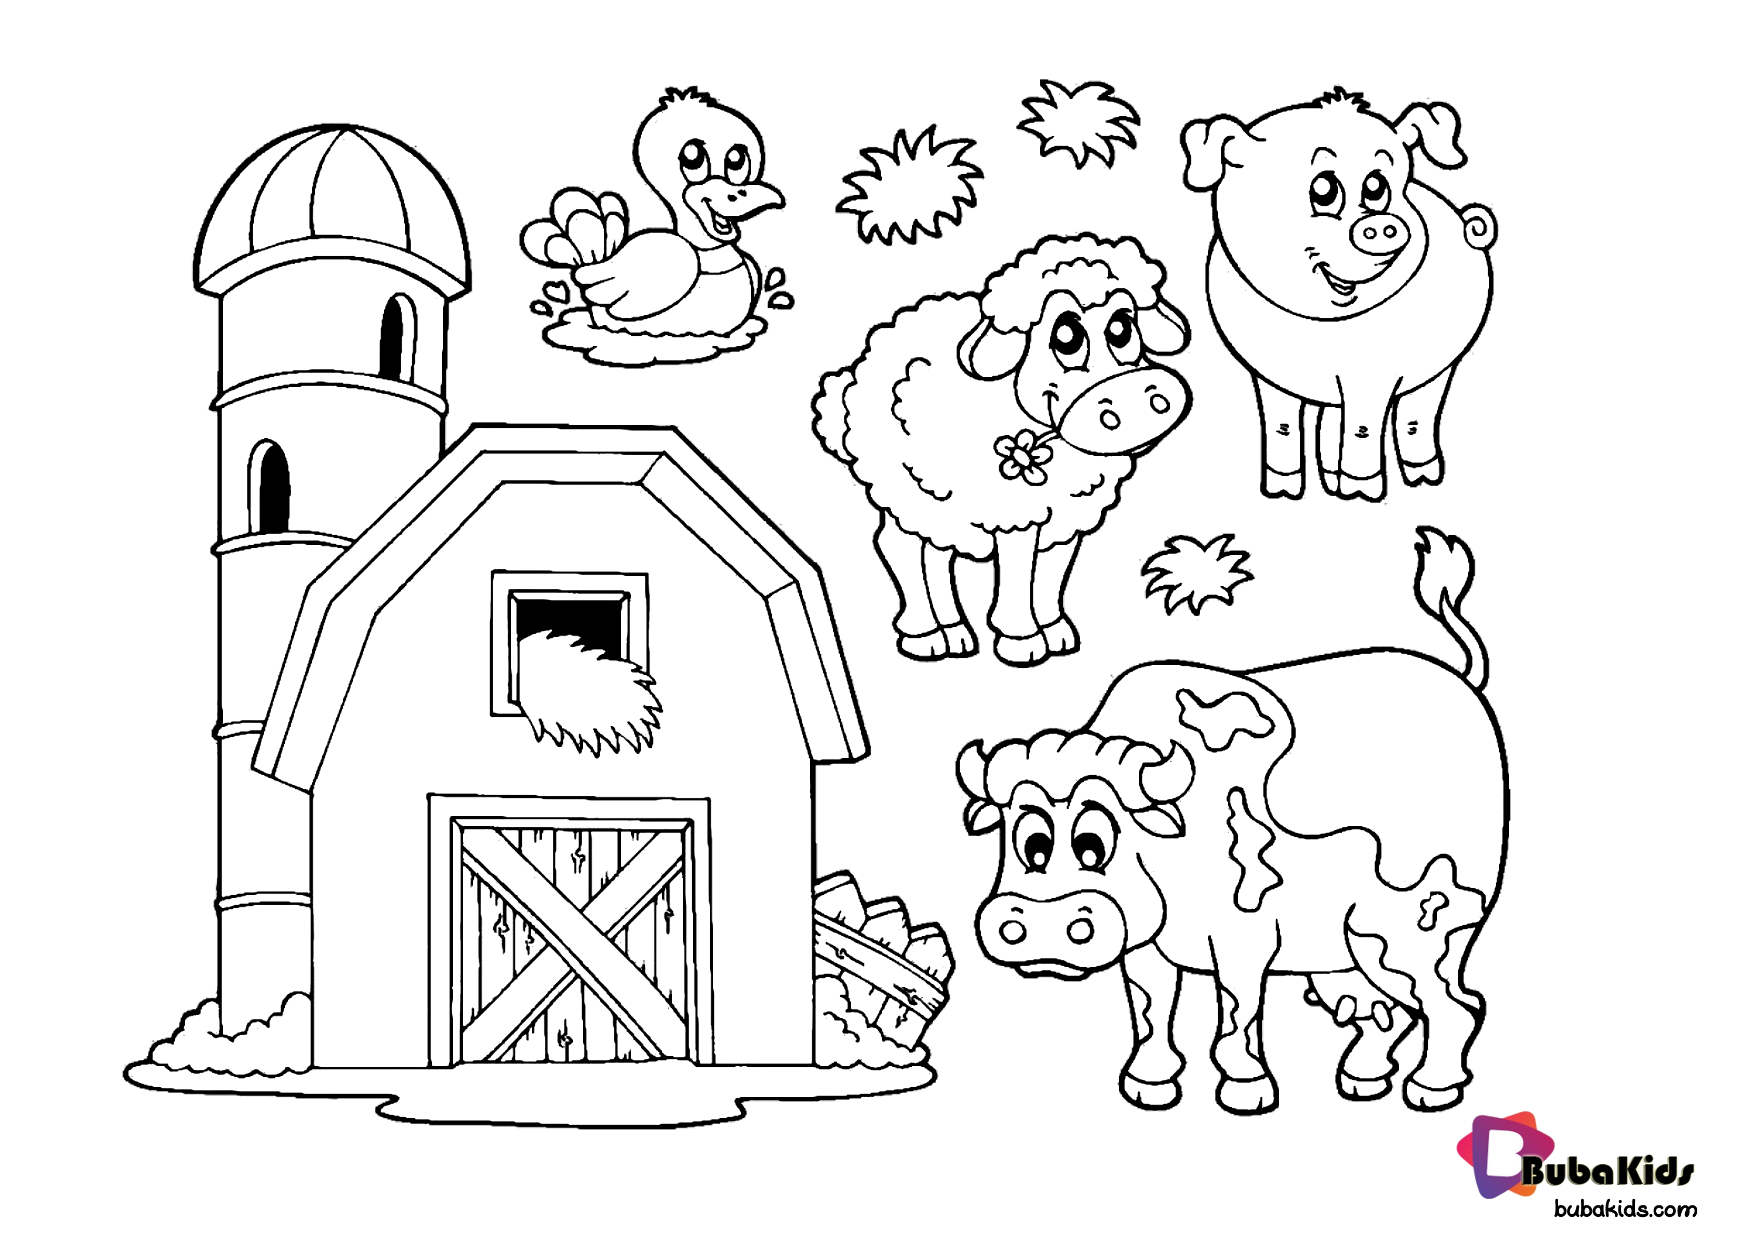 Farm animal coloring page for children to print and color Wallpaper